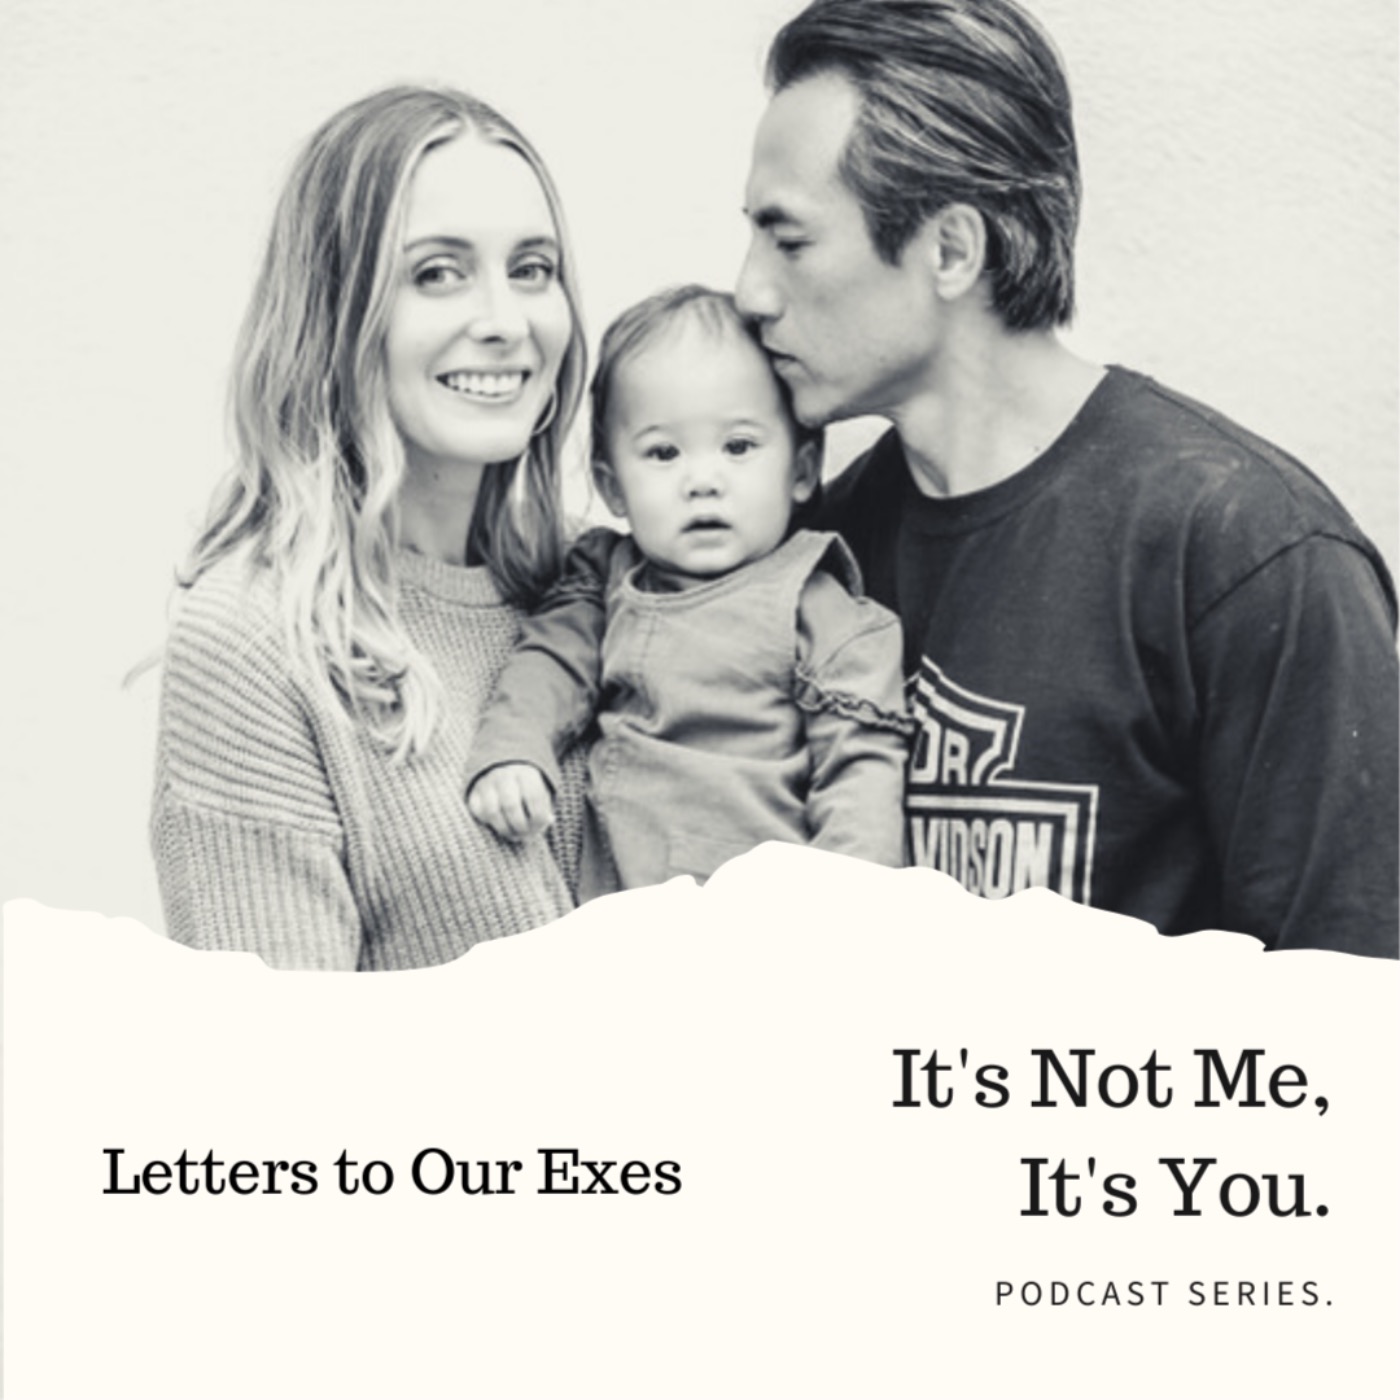 It's Not Me, It's You: Letters to Our Exes